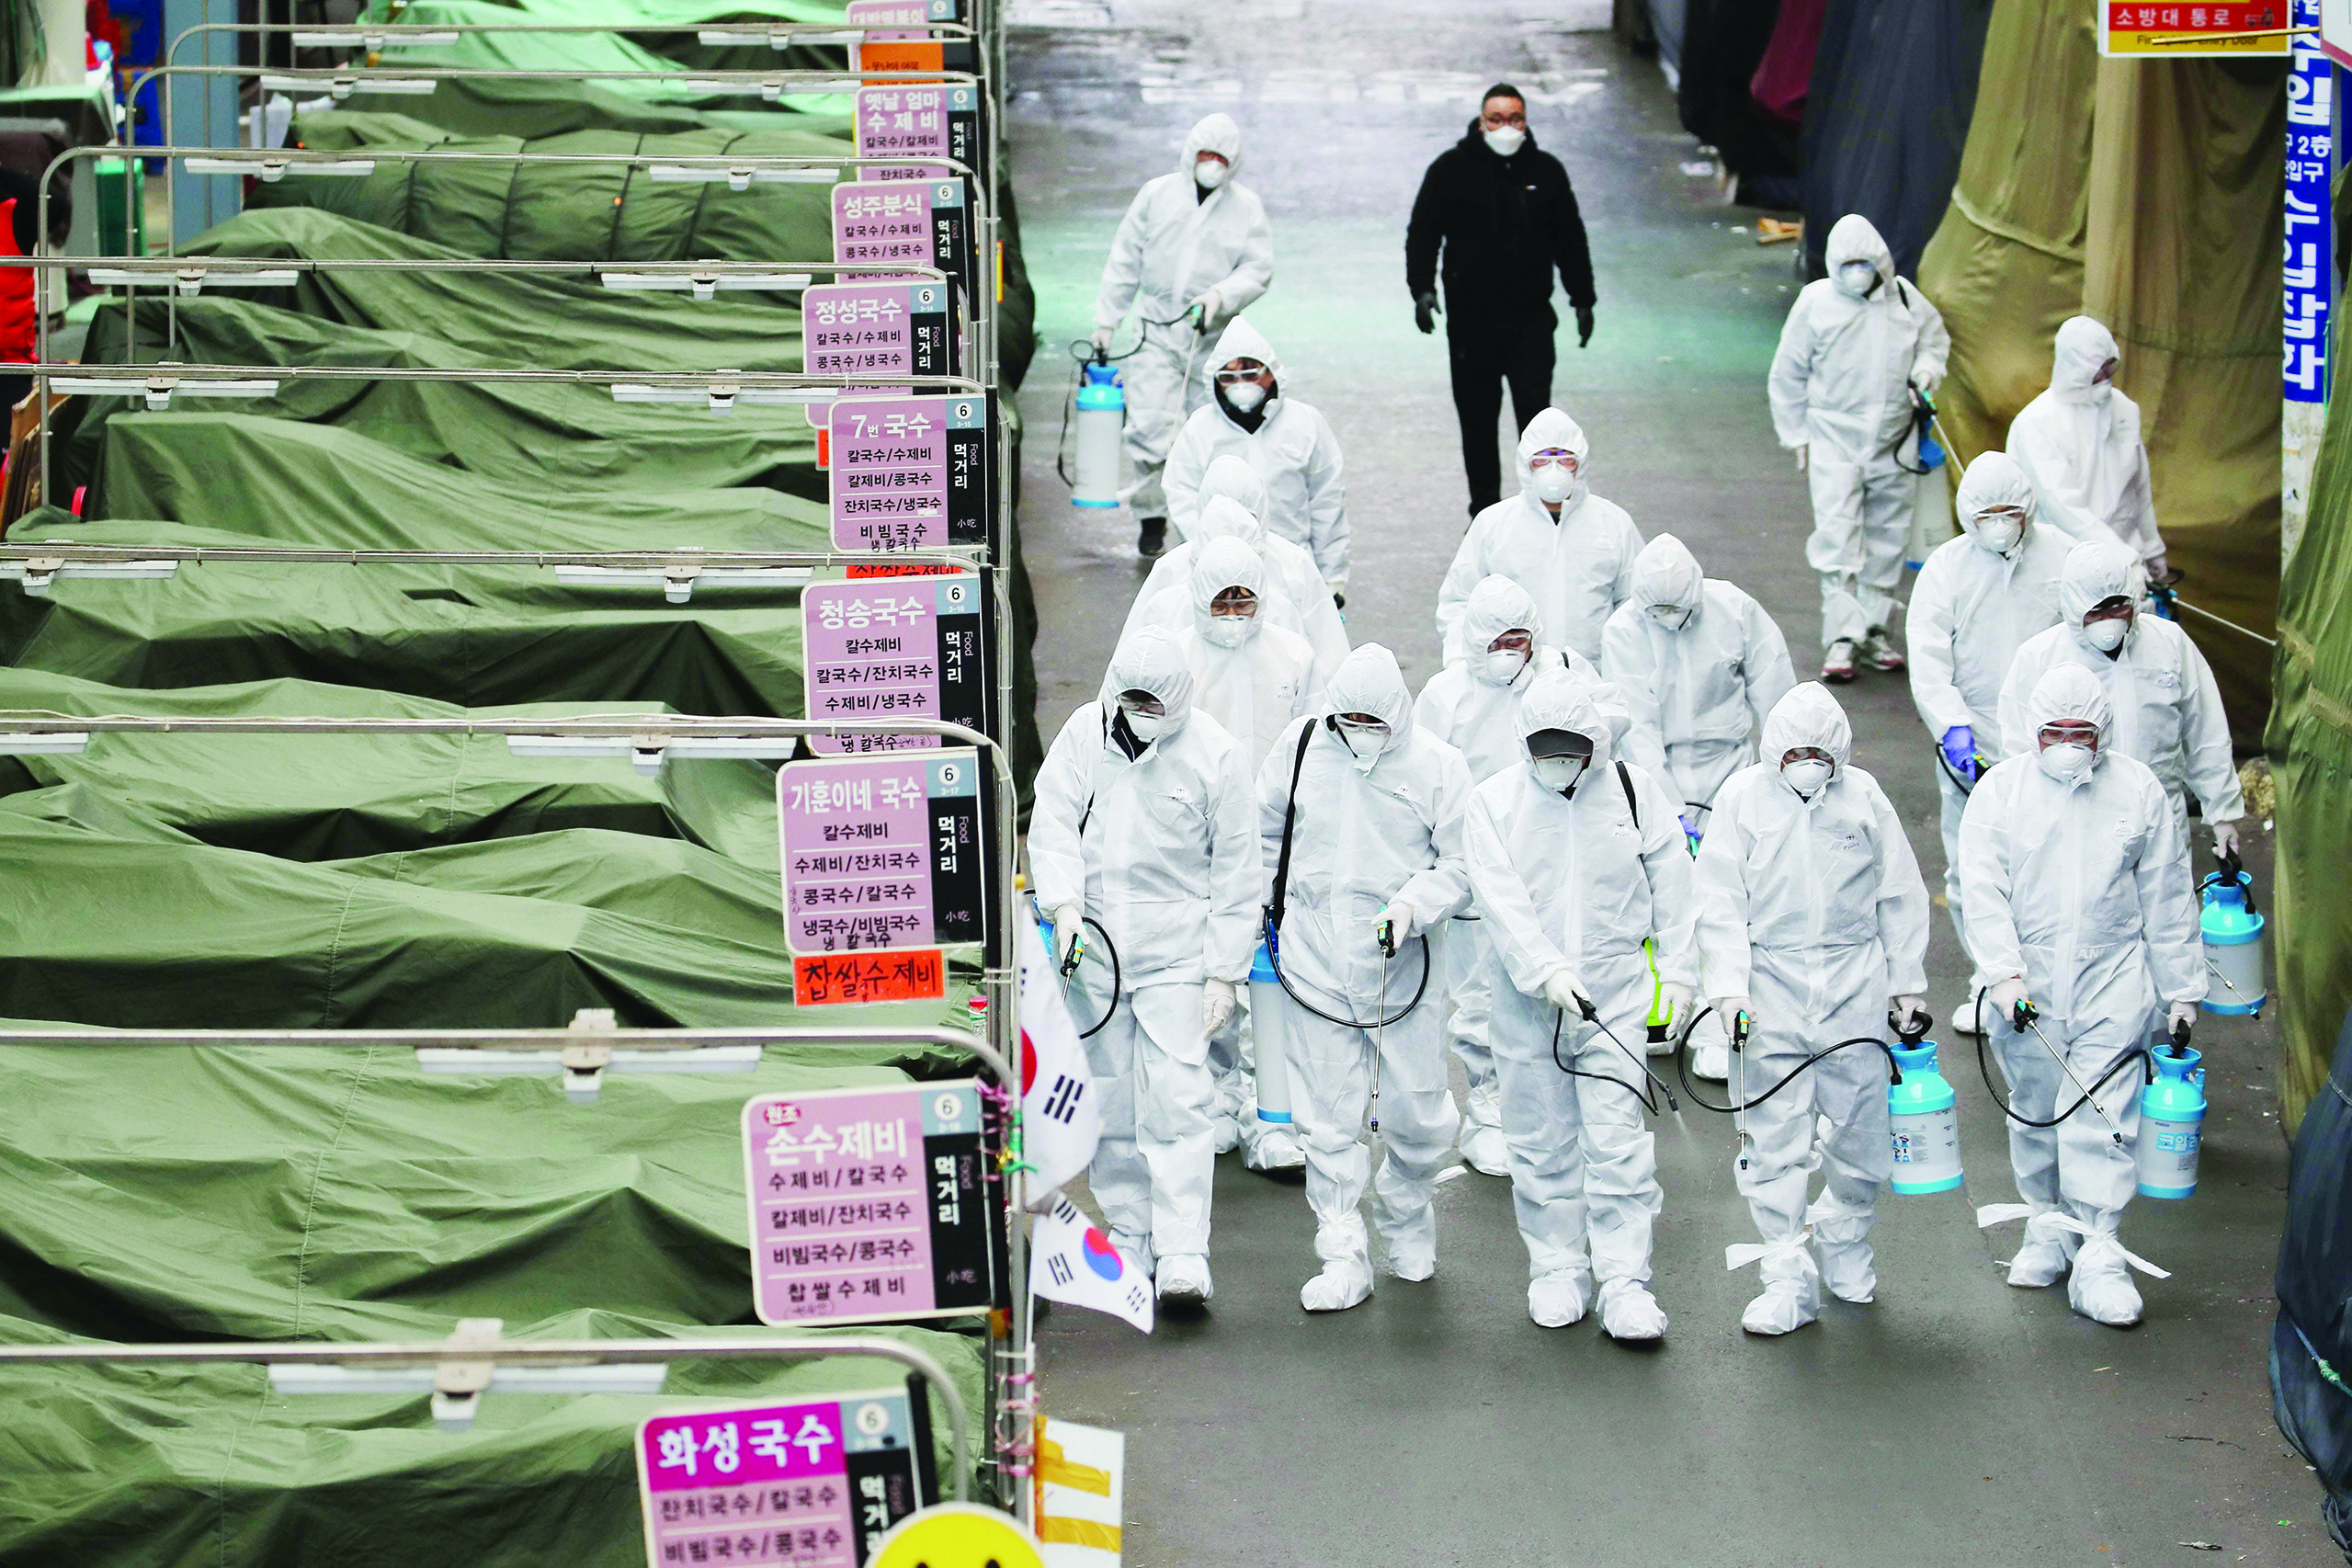 TOPSHOT - Market workers wearing protective gear spray disinfectant at a market in the southeastern city of Daegu on February 23, 2020 as a preventive measure after the COVID-19 coronavirus outbreak. - South Korea reported two additional deaths from coronavirus and 123 more cases on February 23, with nearly two thirds of the new patients connected to a religious sect. The national toll of 556 cases is now the second-highest outside of China. (Photo by - / YONHAP / AFP) / - South Korea OUT / REPUBLIC OF KOREA OUT  NO ARCHIVES  RESTRICTED TO SUBSCRIPTION USE